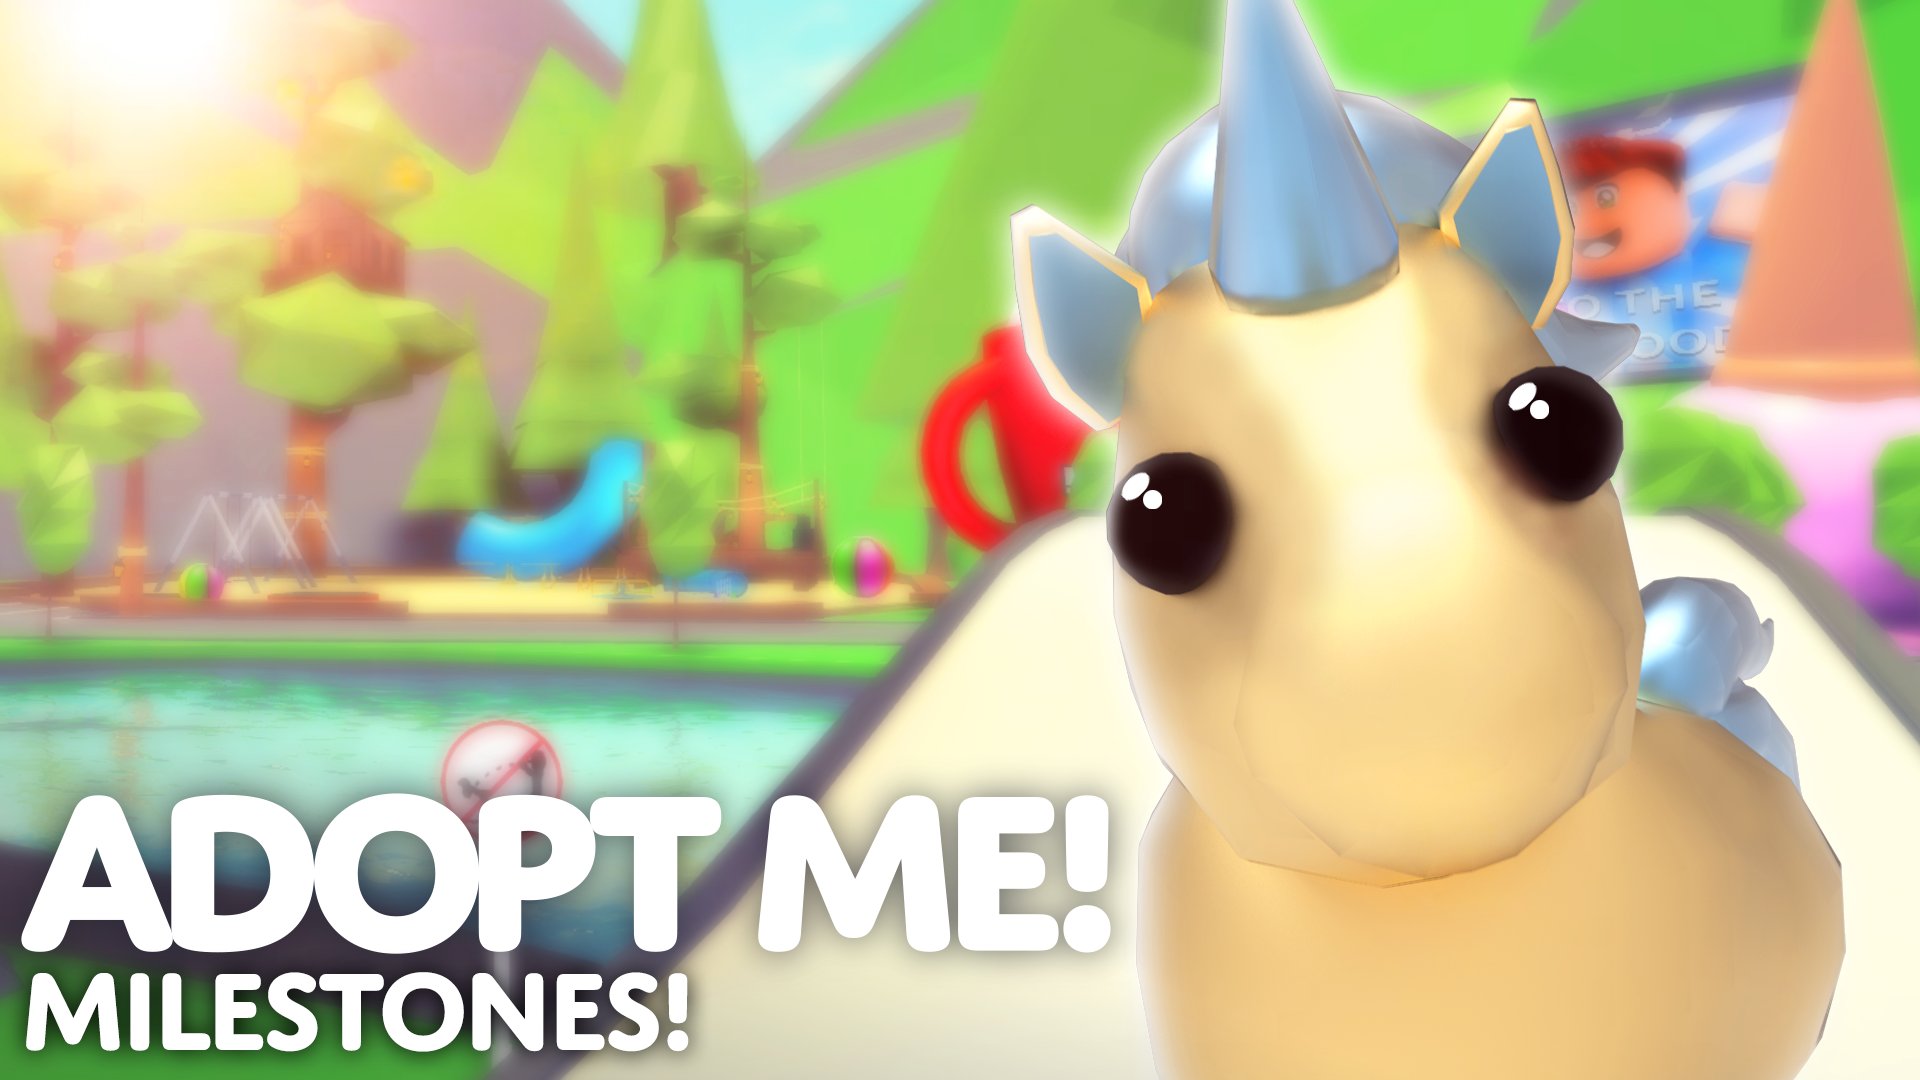 Adopt Me! on X: Starting Friday, everyday you log into Adopt Me you'll  receive stars, which can be traded in for extra special pets and toys ⭐️  People with current streaks will